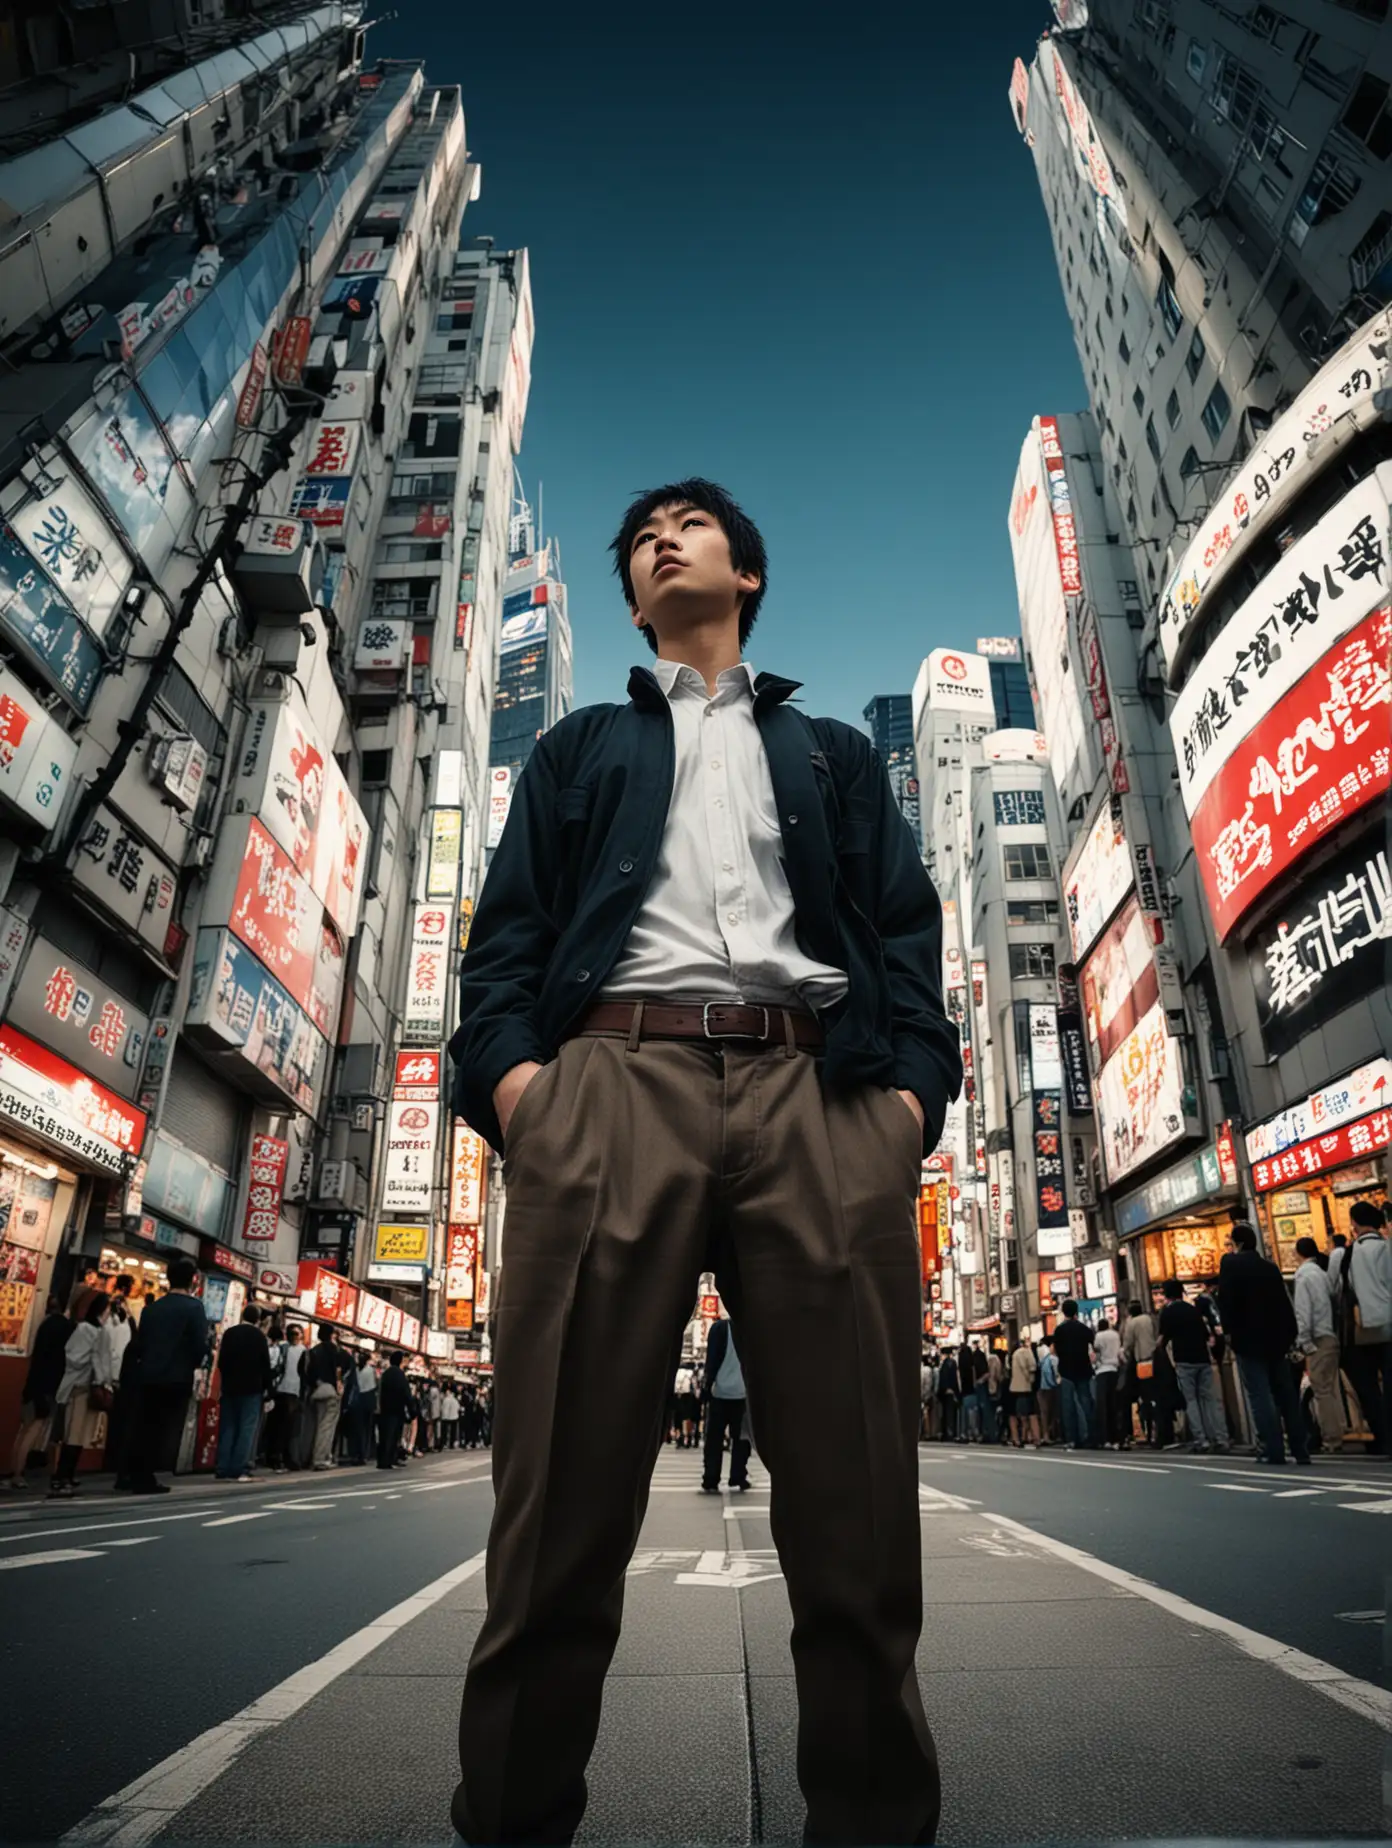 Confident-Young-Man-in-Akihabara-Urban-Street-Scene-with-Towering-Buildings